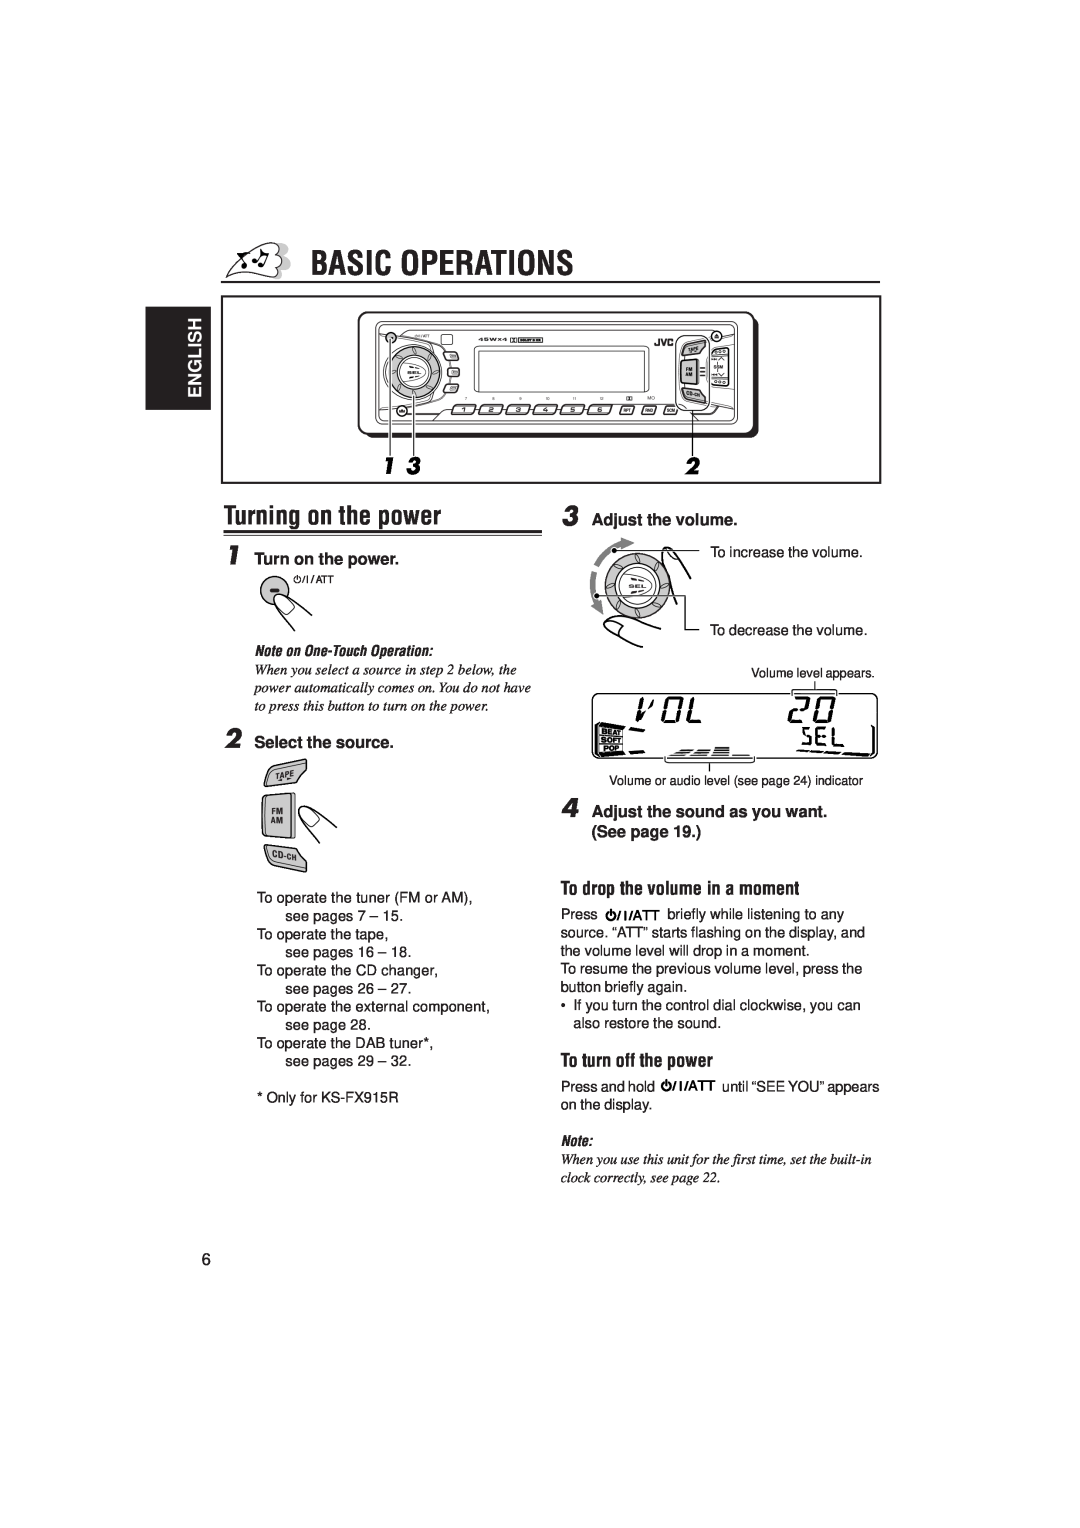 JVC KS-FX815 manual Basic Operations, Turning on the power, To drop the volume in a moment, To turn off the power, English 